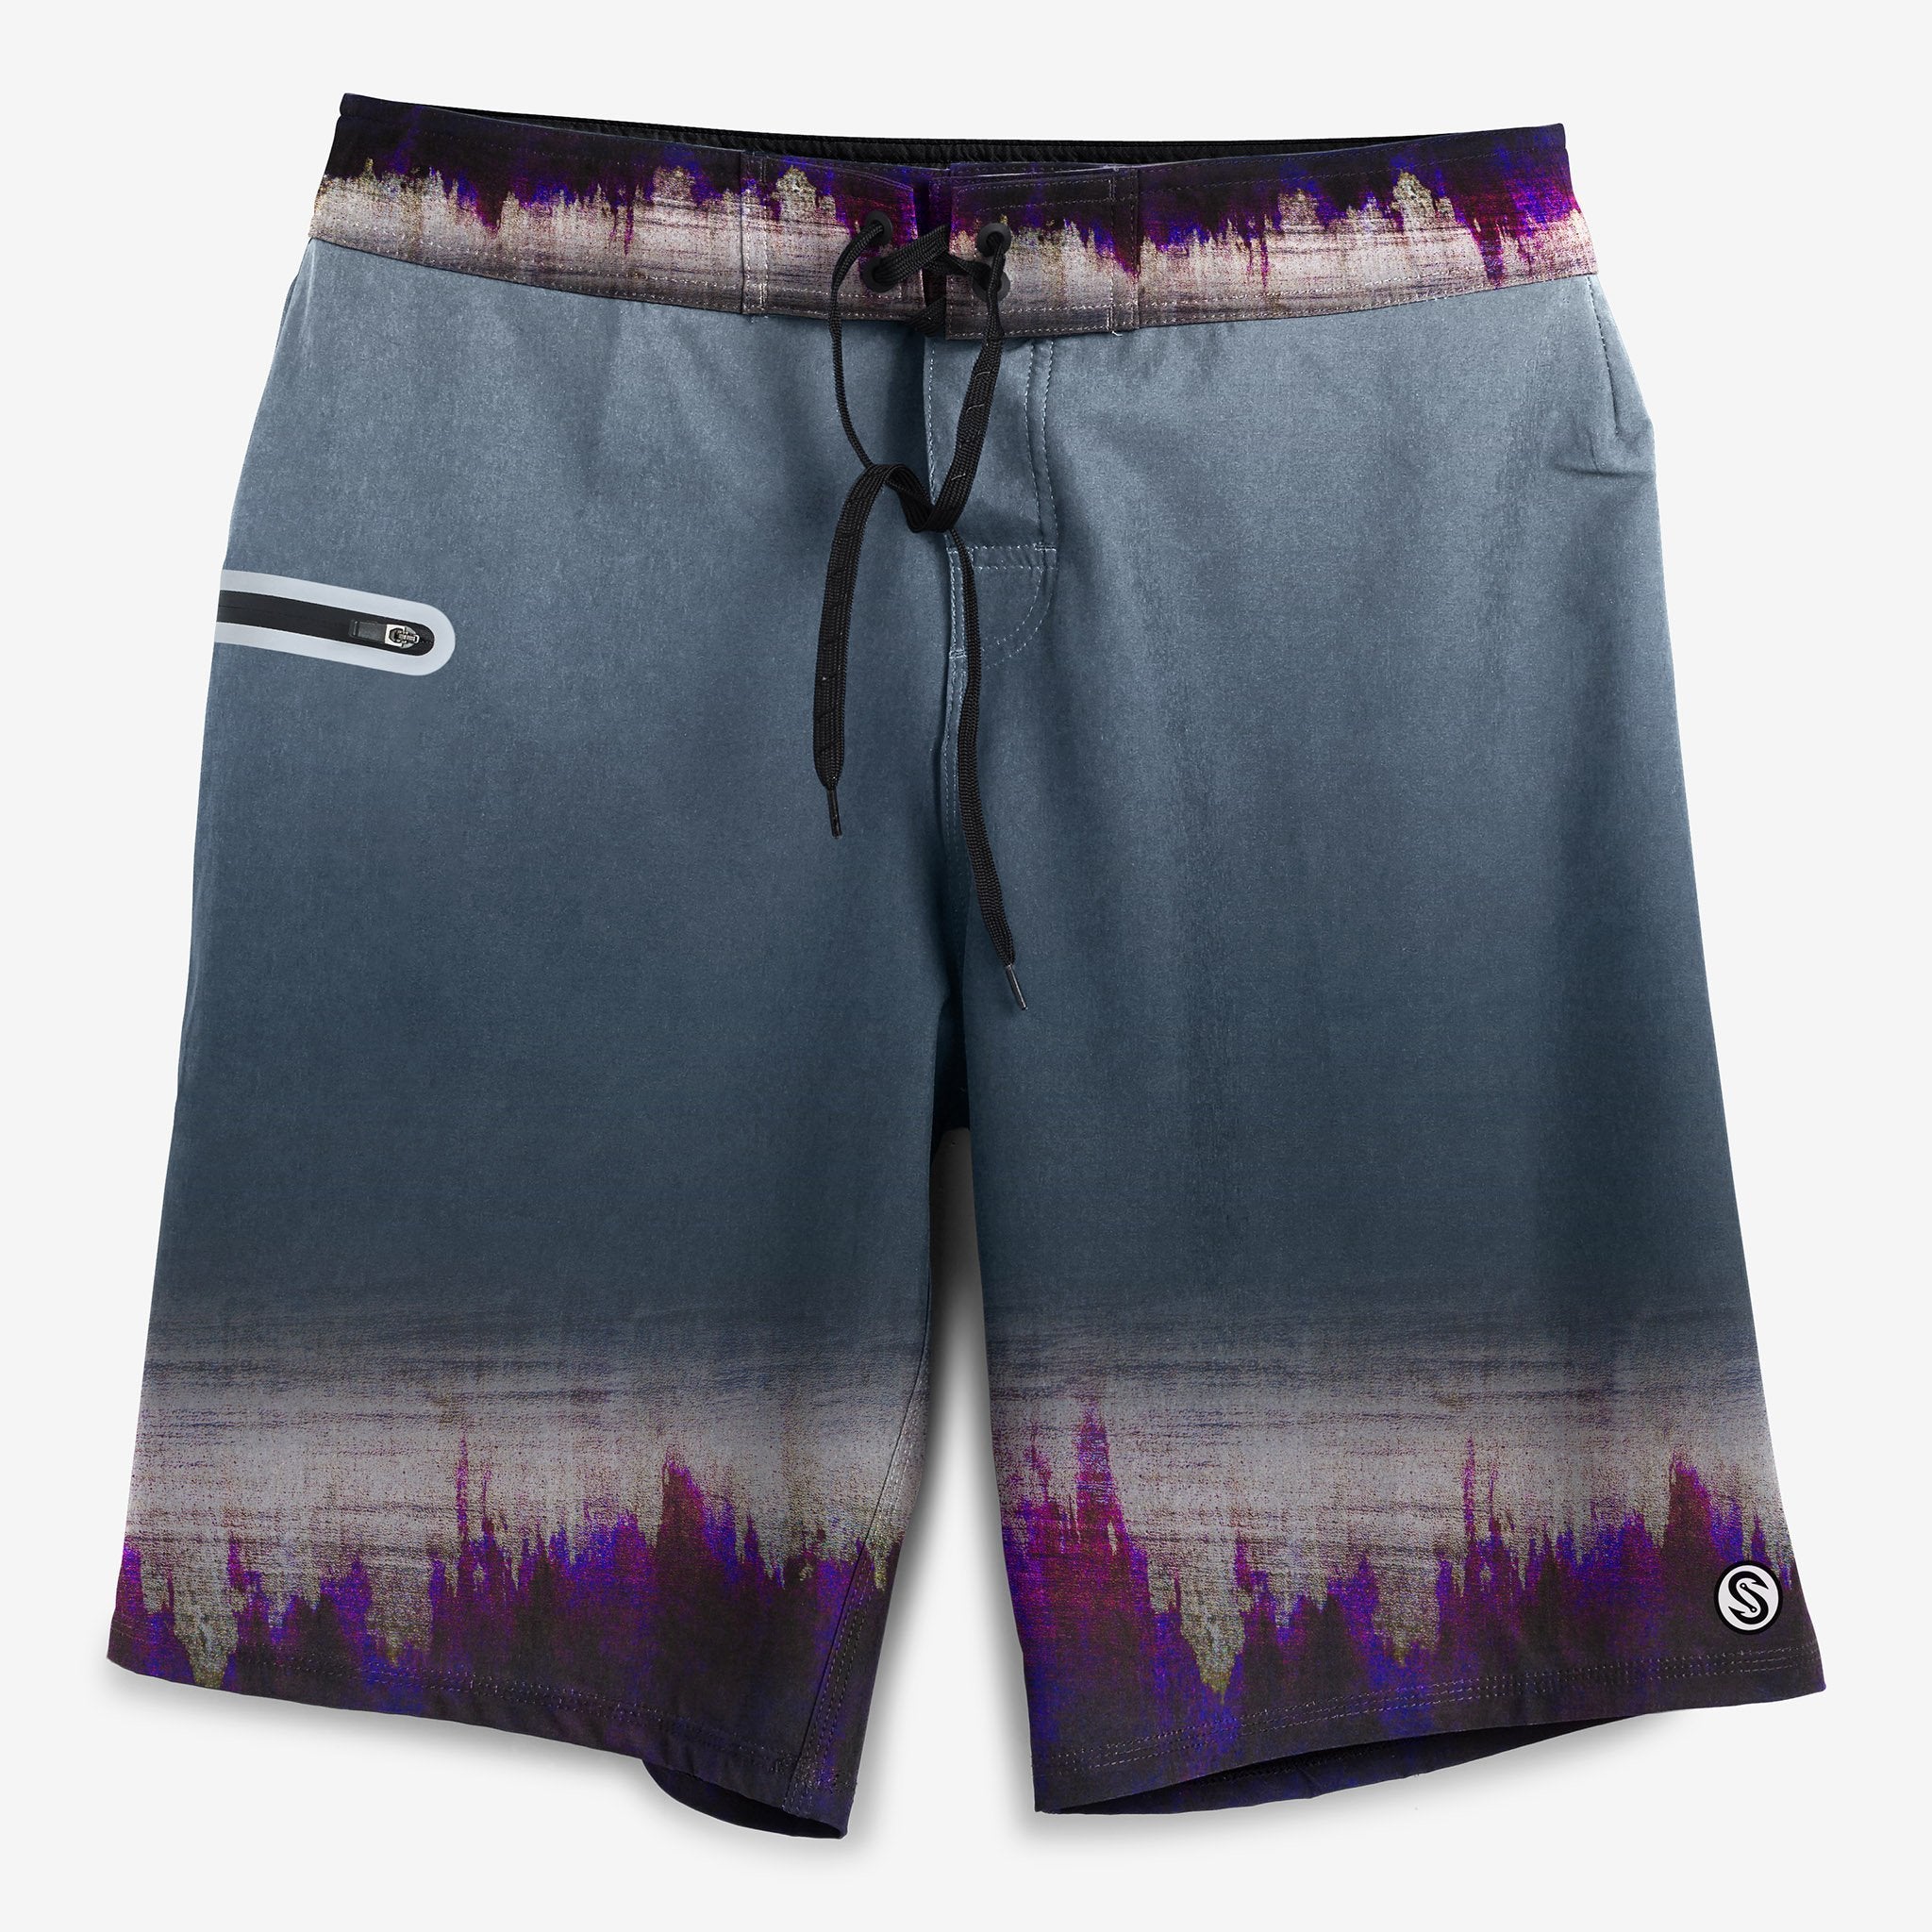 Scales Deep Color Boardshorts in Sword Size W42